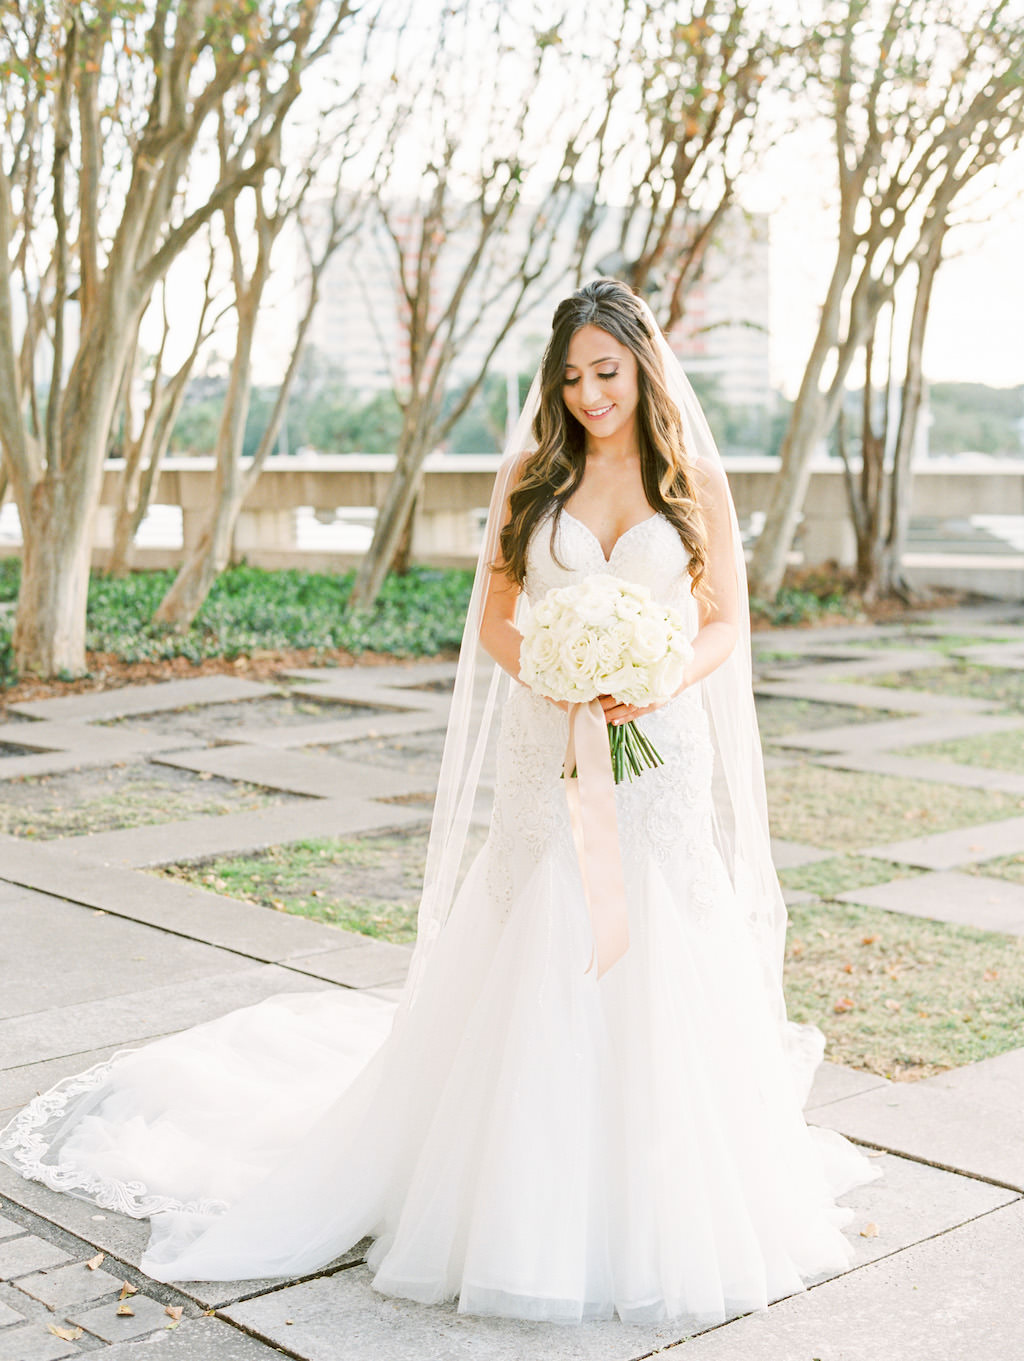 Downtown Tampa Park Outdoor Bridal Portrait in Princess Neckline Lace Trumpet Martina Liana Dress with Cathedral Veil, with White Rose Floral Bouquet with Champagne Ribbon